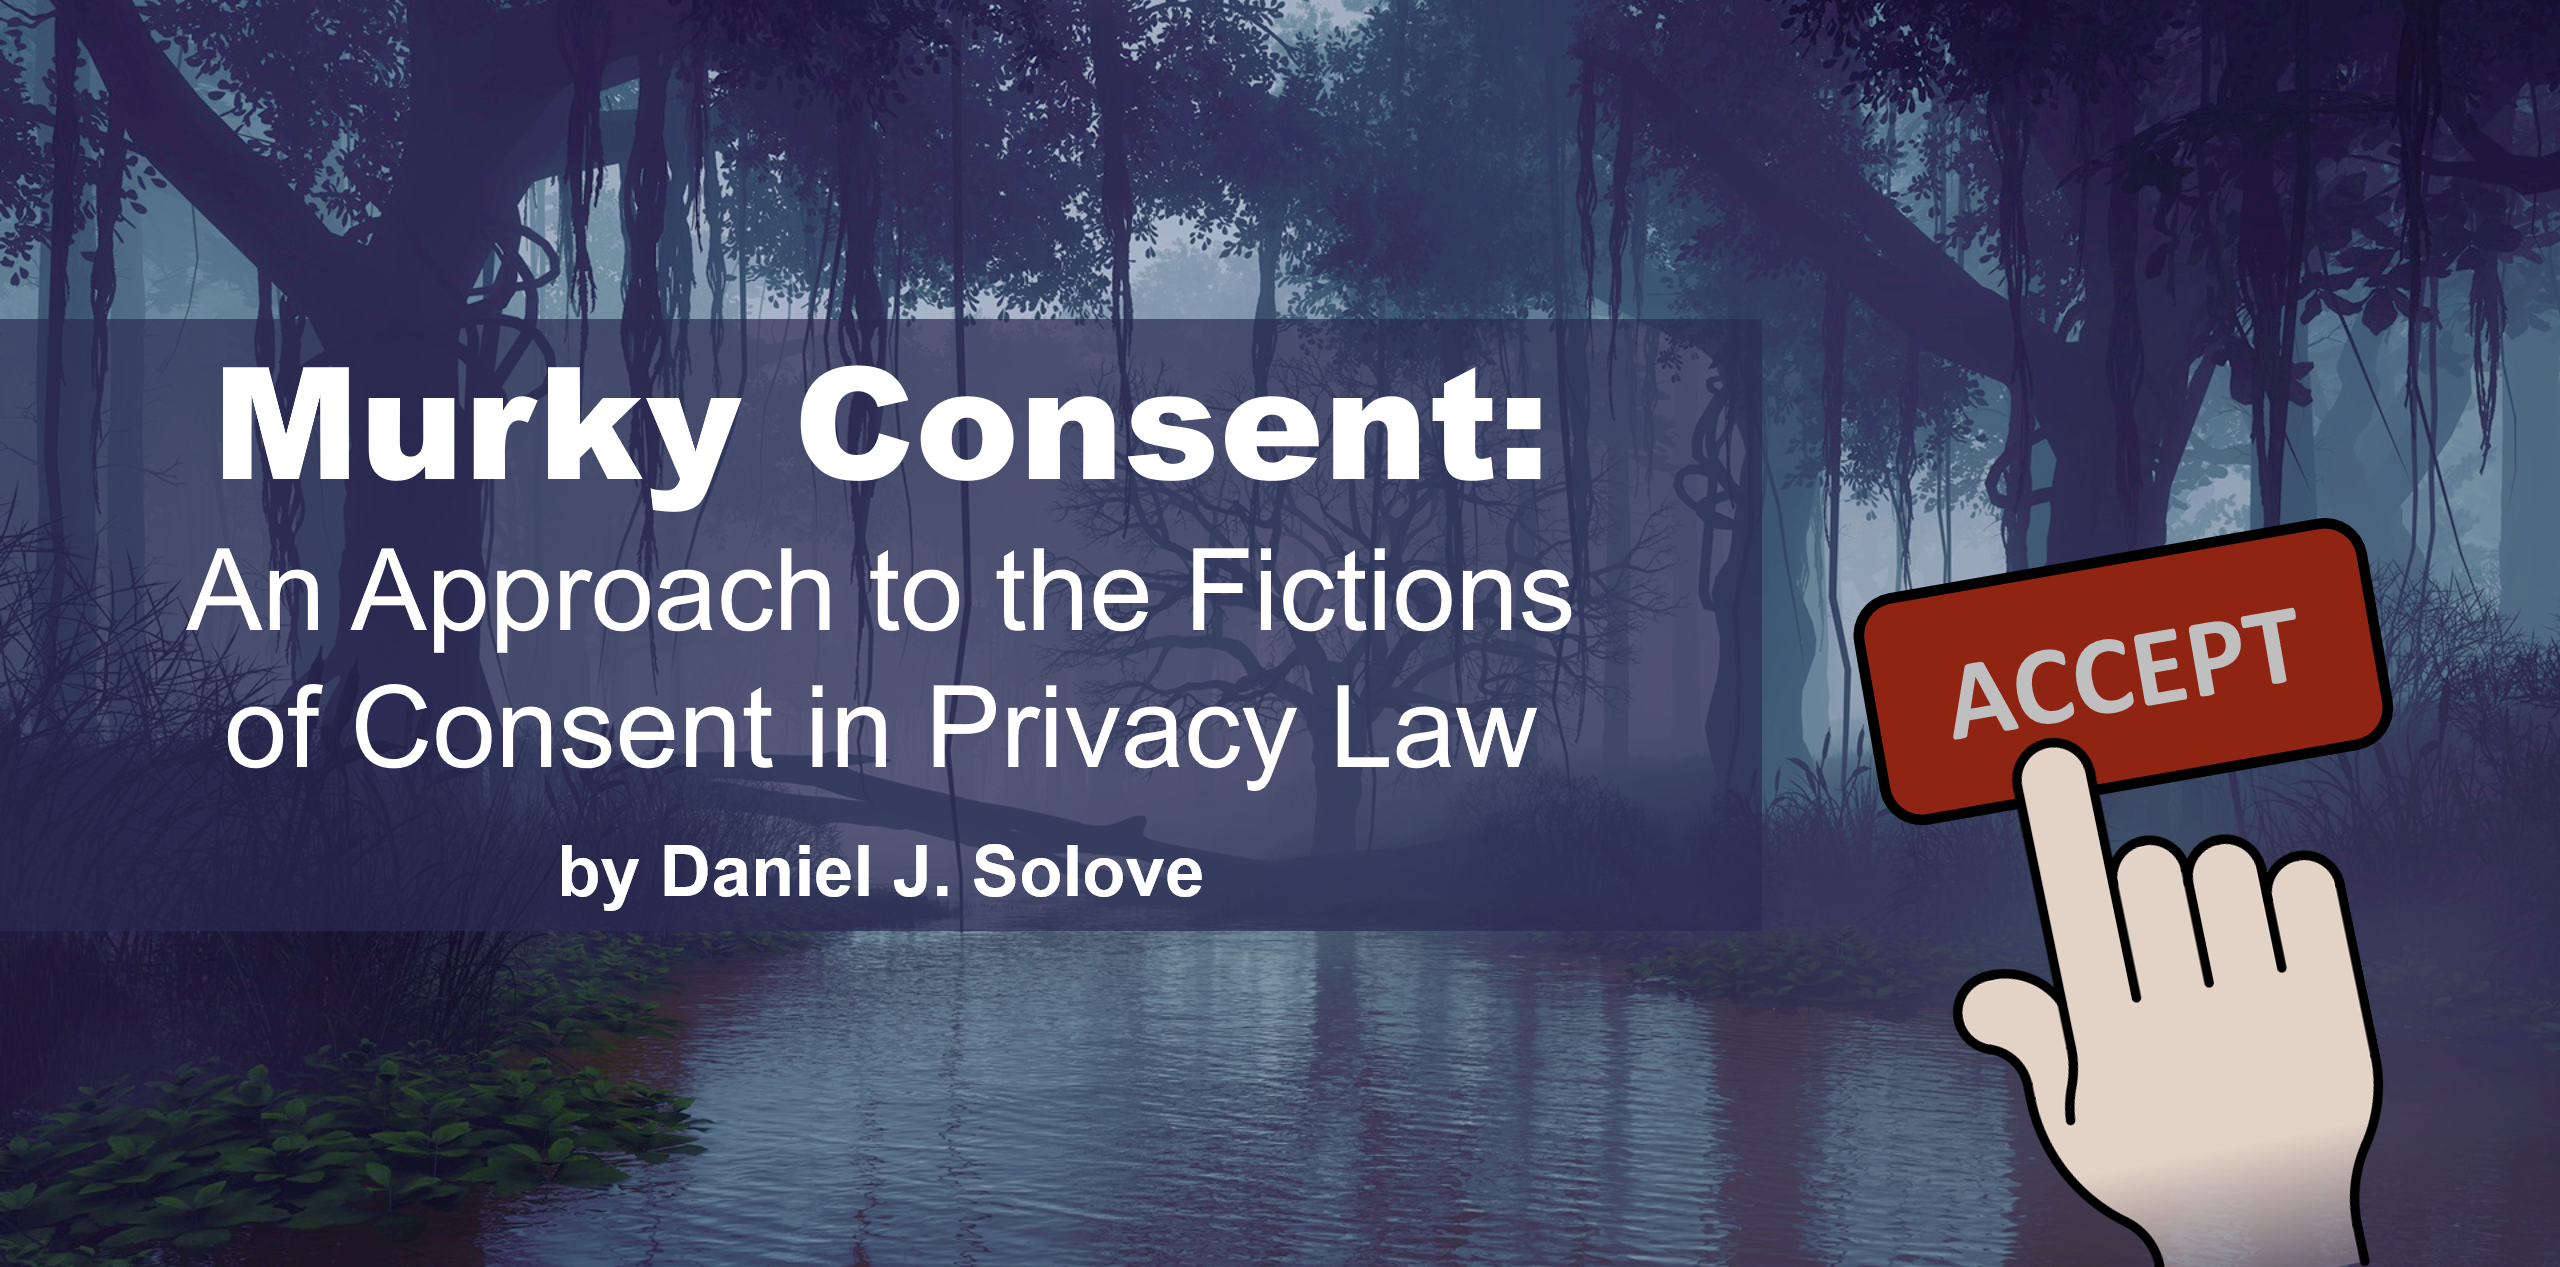 privacy lecture branding image. Murky Consent: An Approach to the Fictions of Consent in Privacy Law, by Daniel J. Solove